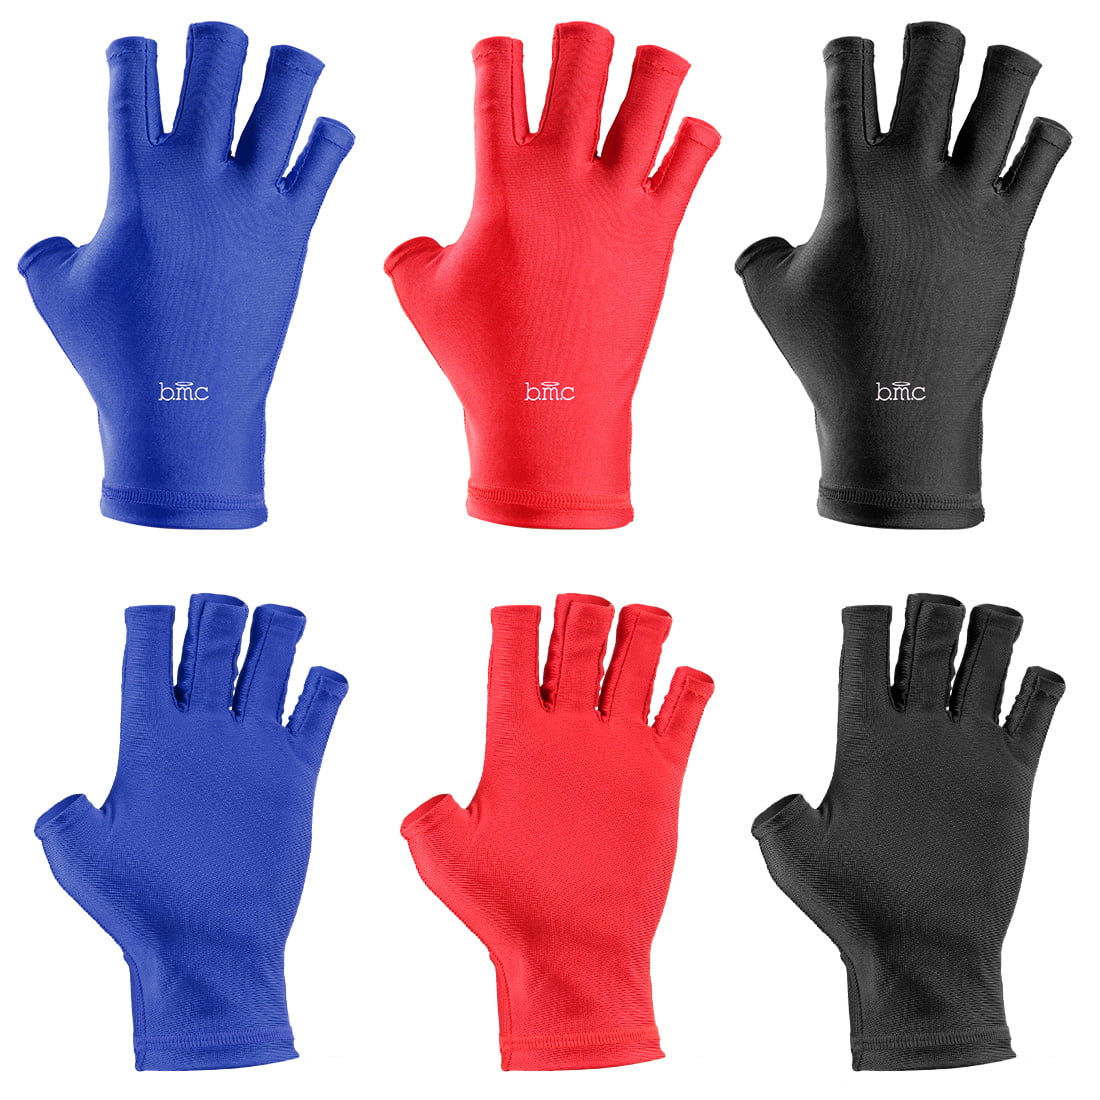 protective gloves for gel manicure